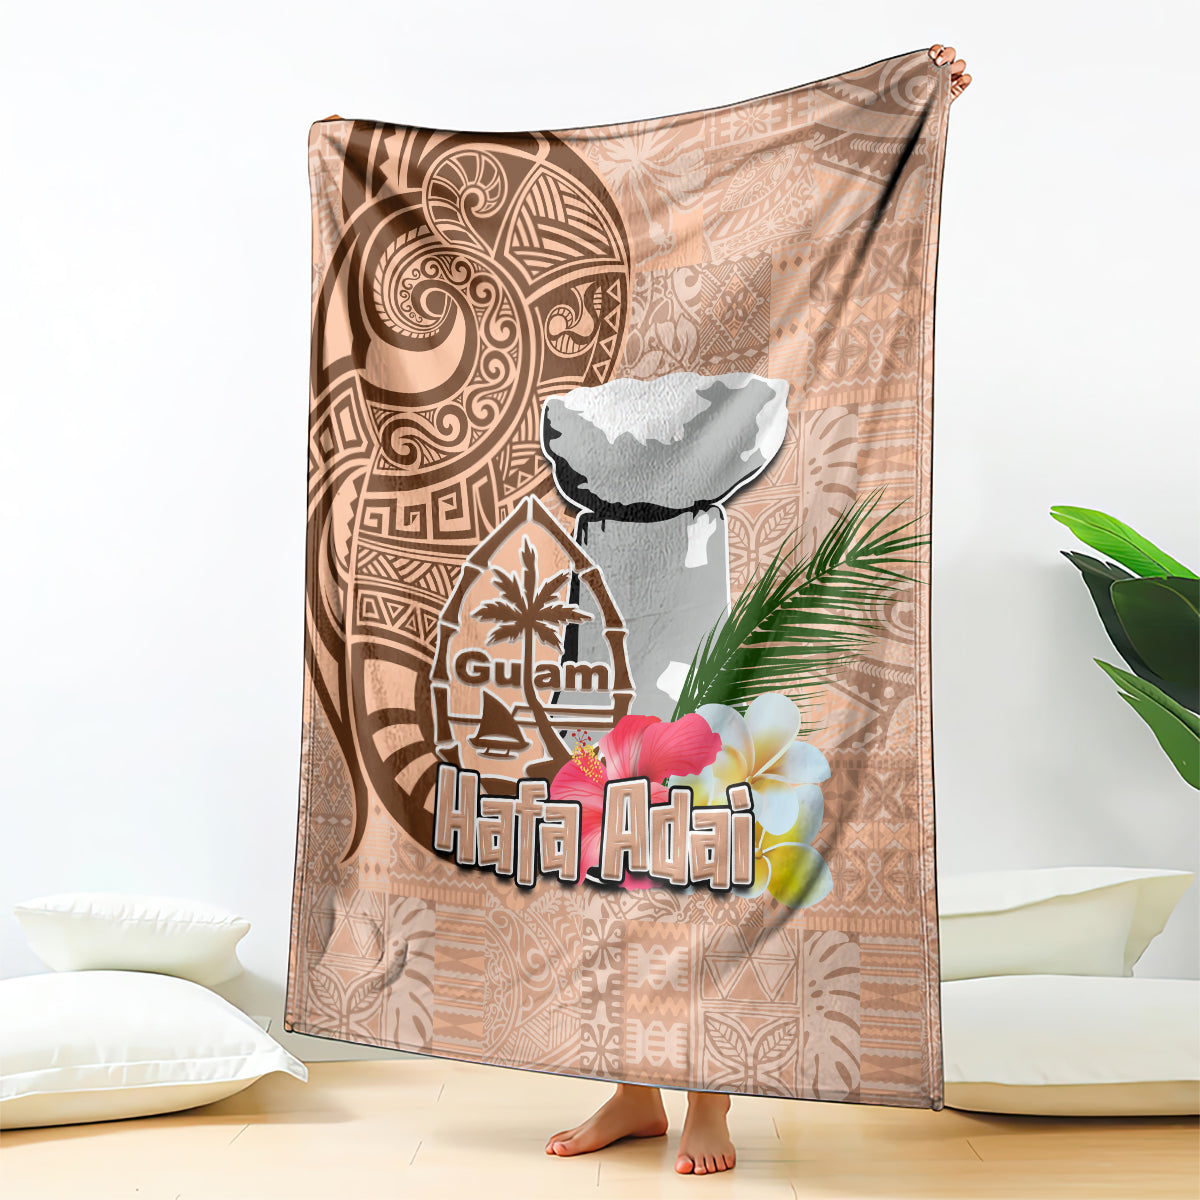 Guam Seal and Latte Stone With Ethnic Tapa Pattern Blanket Peach Fuzz Color LT03 Peach Fuzz - Polynesian Pride